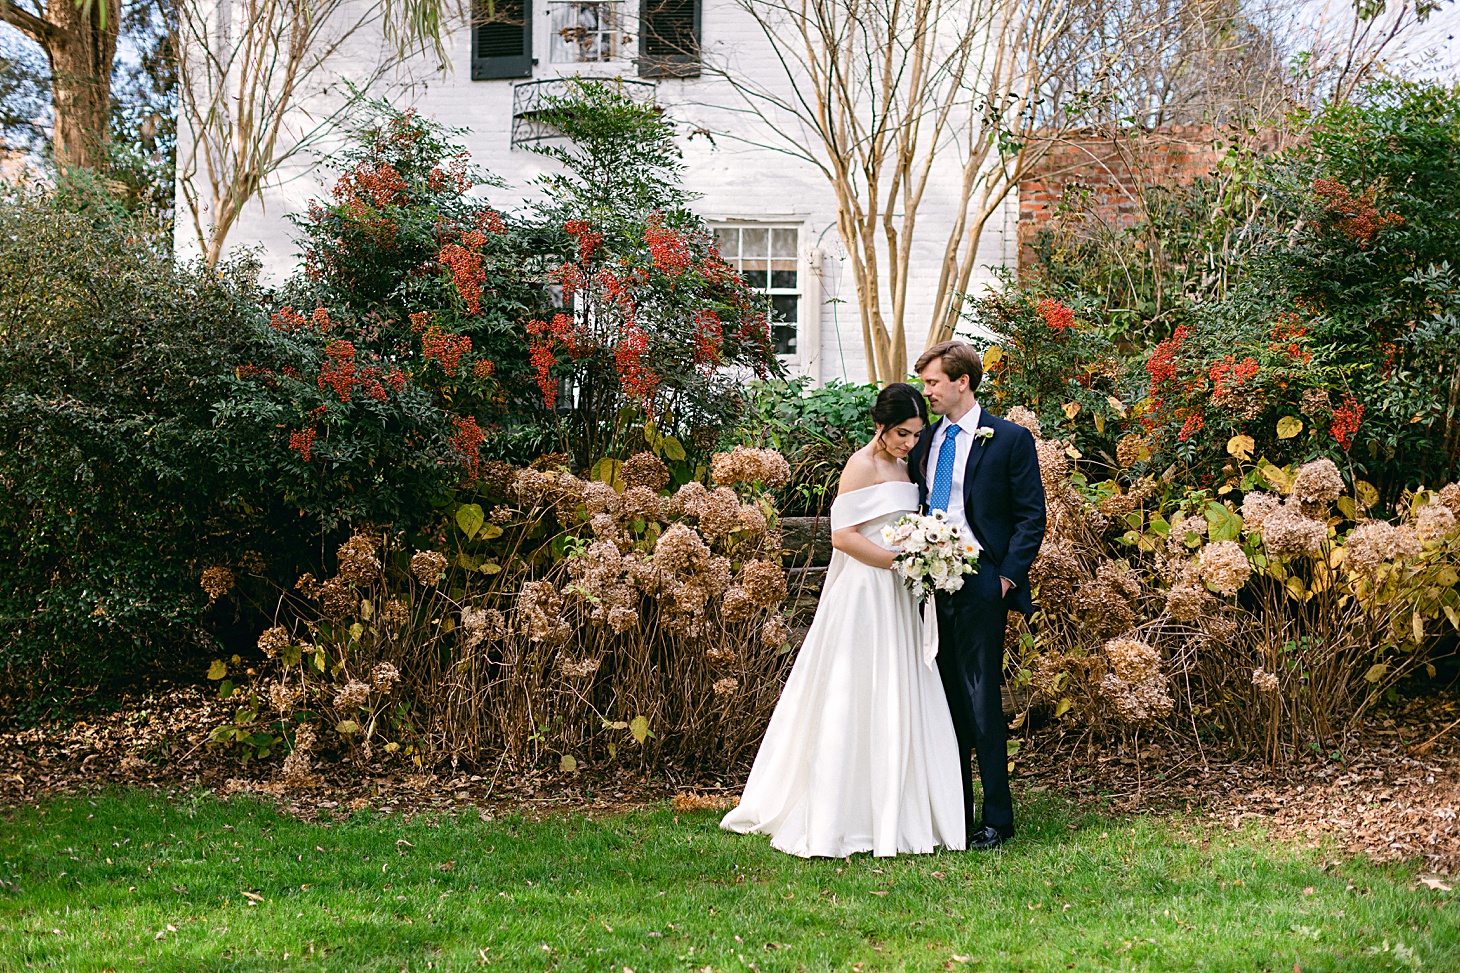 Secret garden portraits at wedding at The Clifton Charlottesville by Sarah Bradshaw Photography